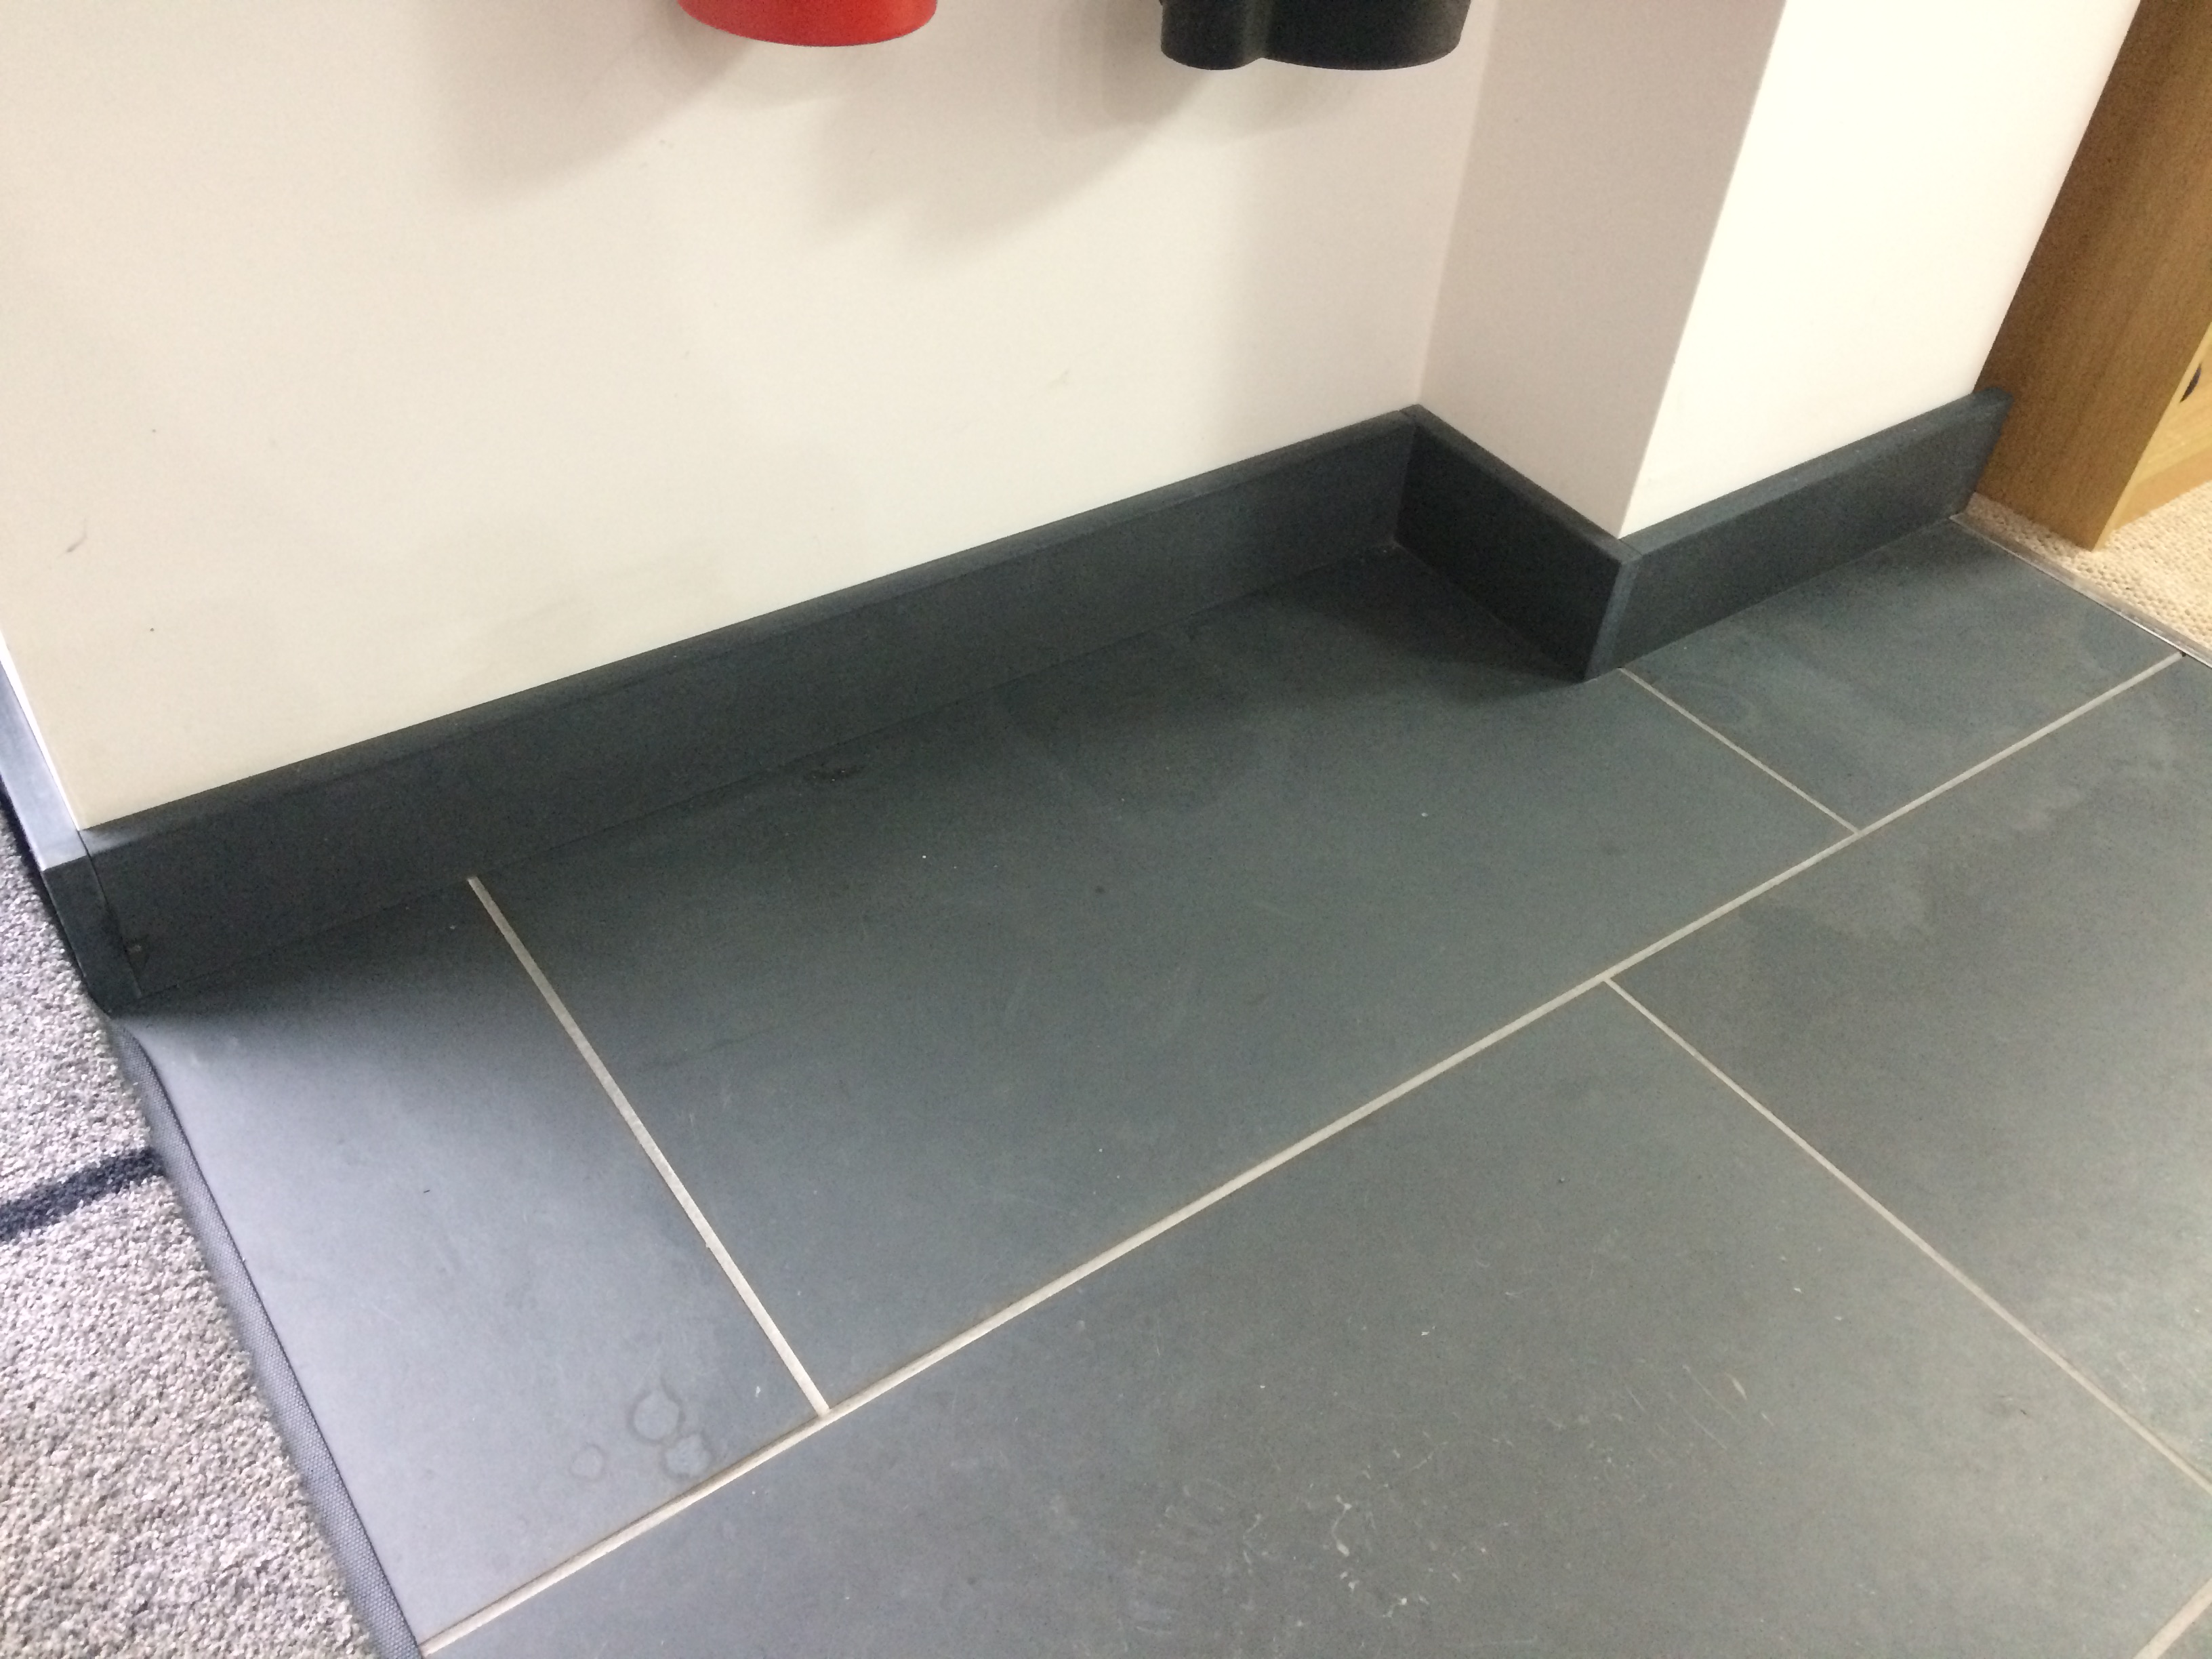 Right Price Tiles & Wood Flooring - 'Autun Ceniza' wood look ceramic floor  tile.. Matching skirting tiles also available for a perfect finish 👌 ONLY  €17.99 per Sq Yd!! https://rightpricetiles.ie/product/autun-ceniza/ |  Facebook